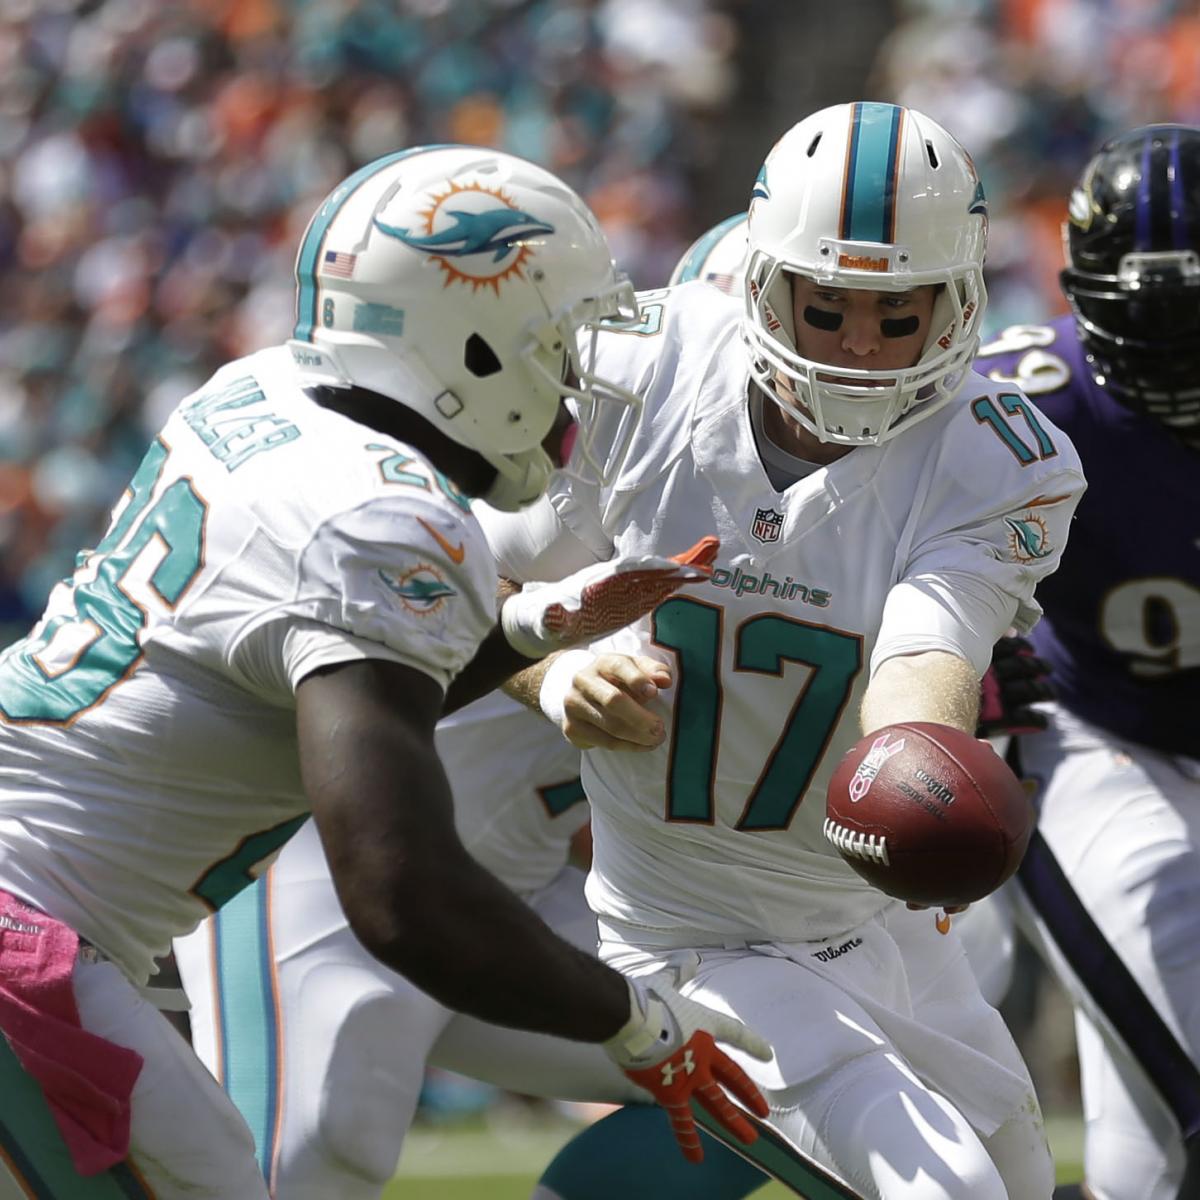 Dolphins vs Ravens: Miami stuns Baltimore in upset victory on